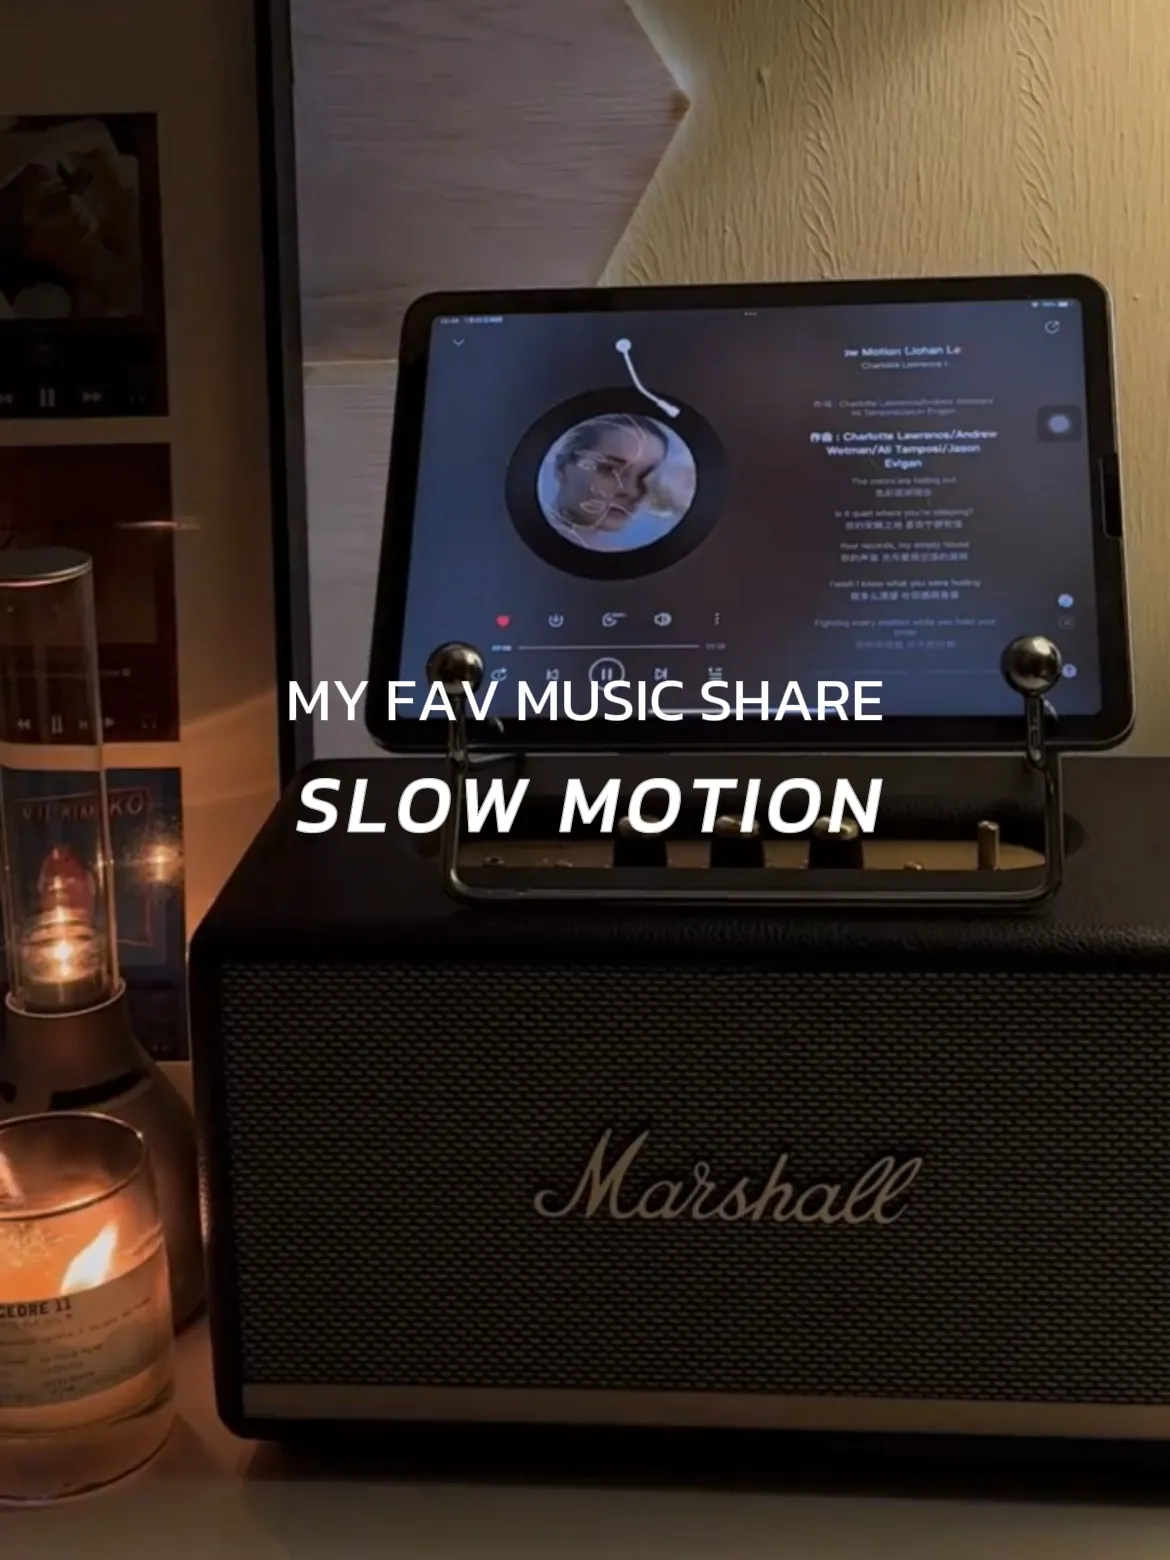 Marshall Emberton turns itself off if you pause music for a few mins! : r/ marshall